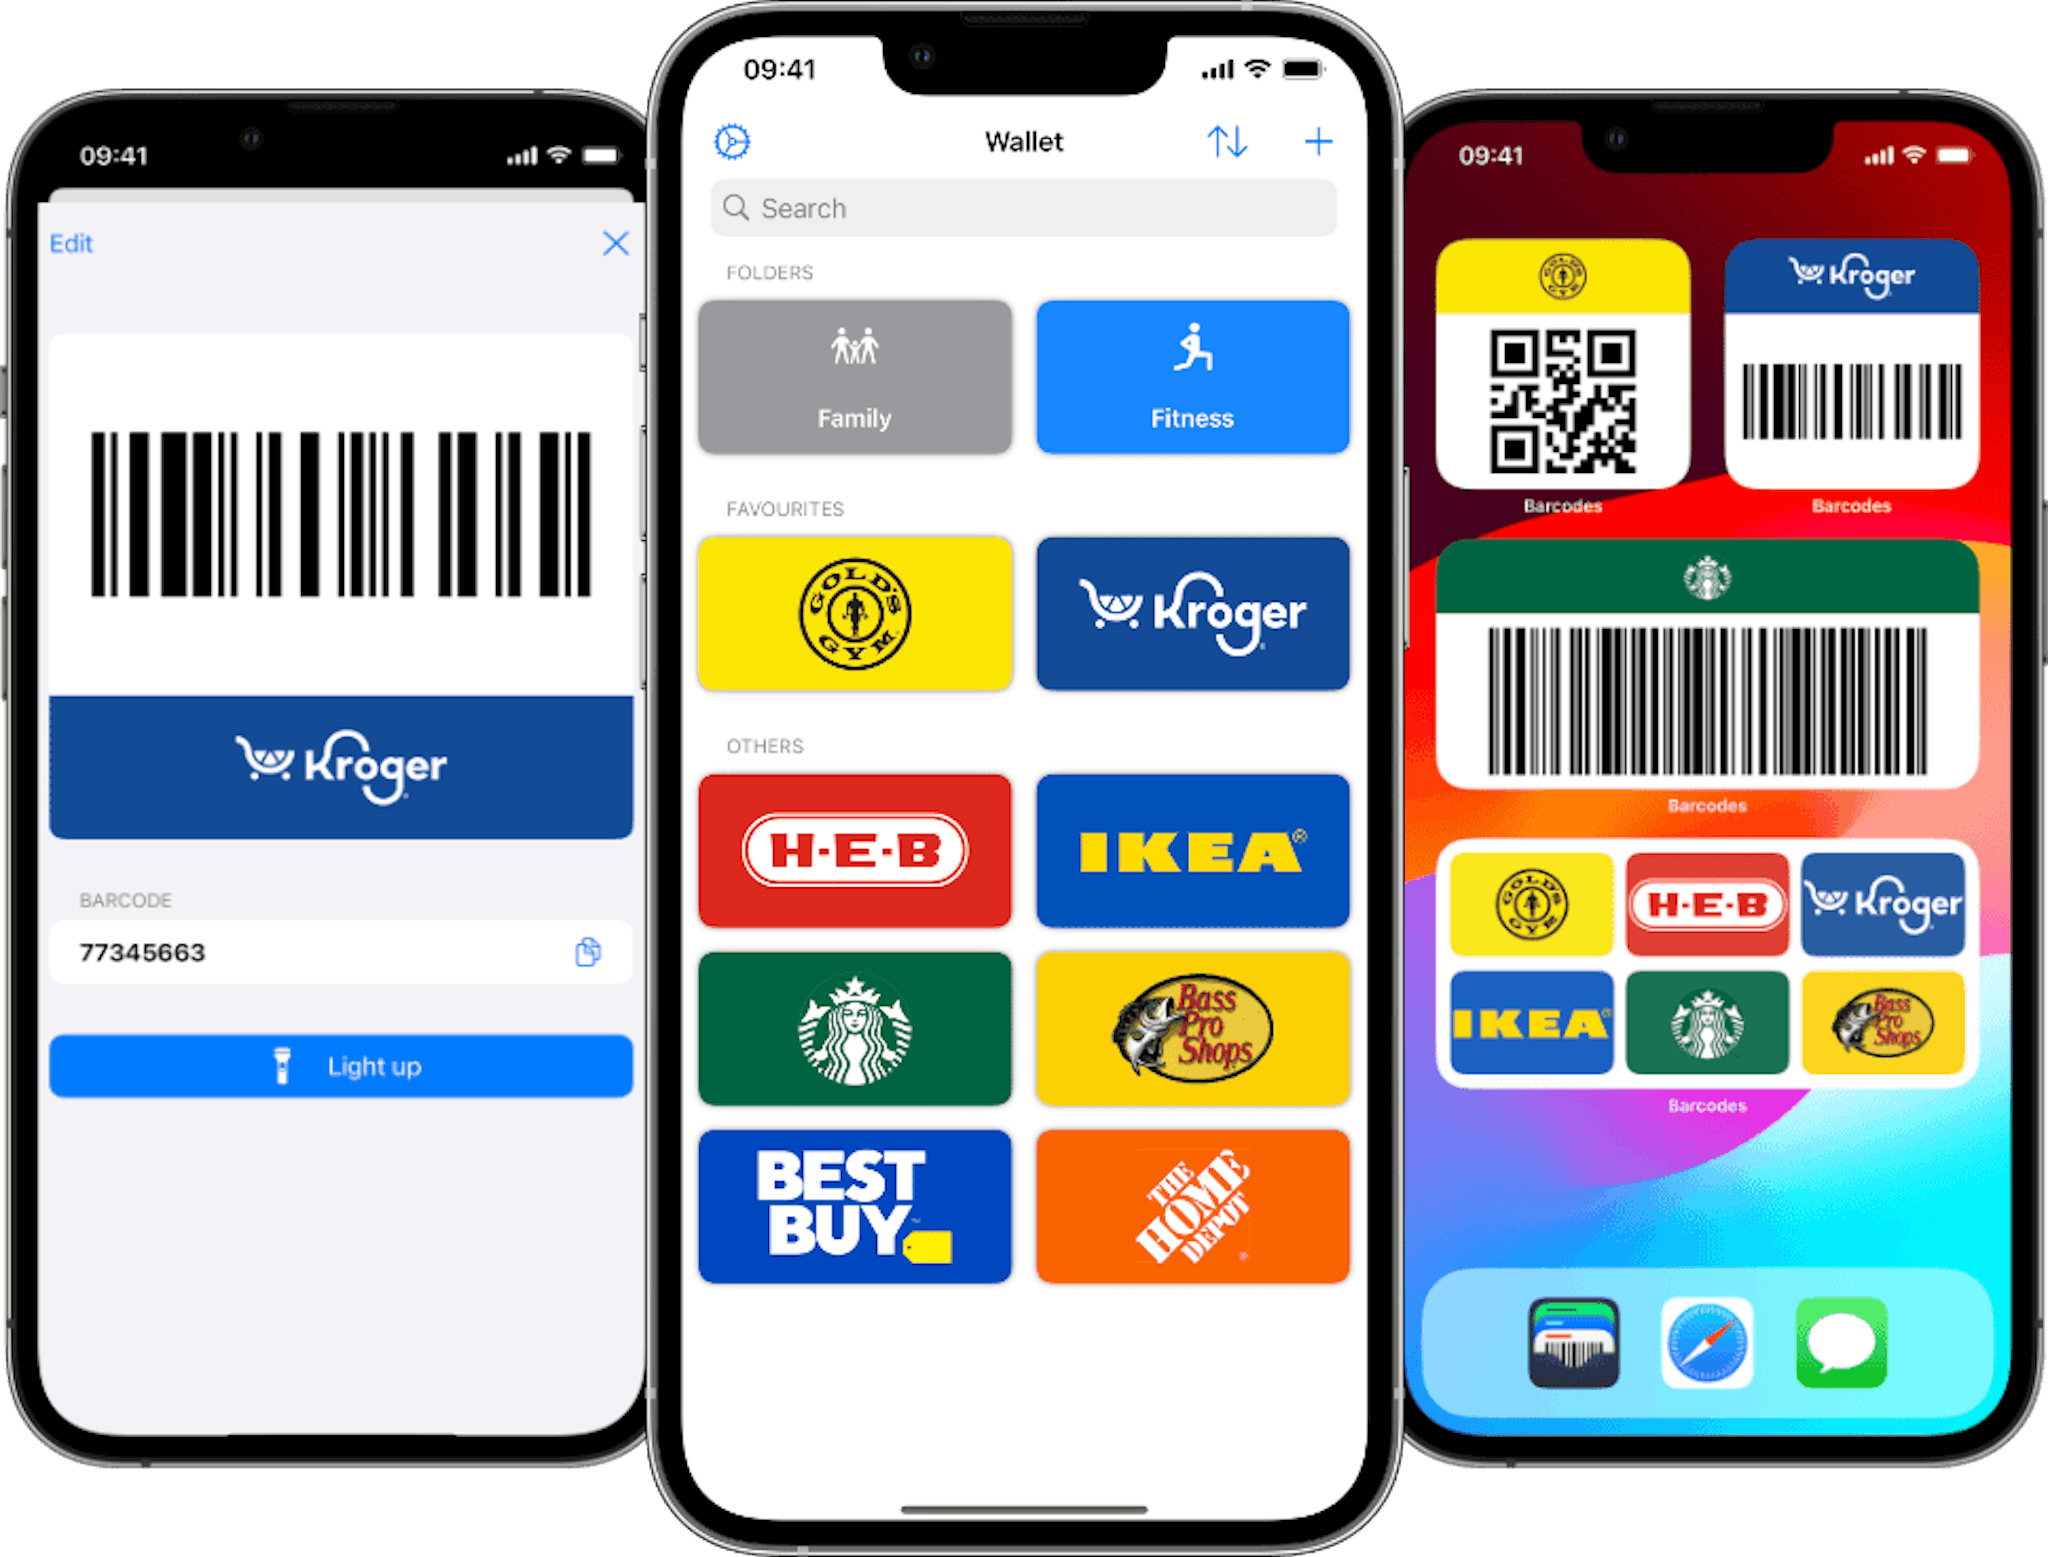 iPhone's showing scanning and using barcodes and loyalty cards in a digital wallet with Barcodes